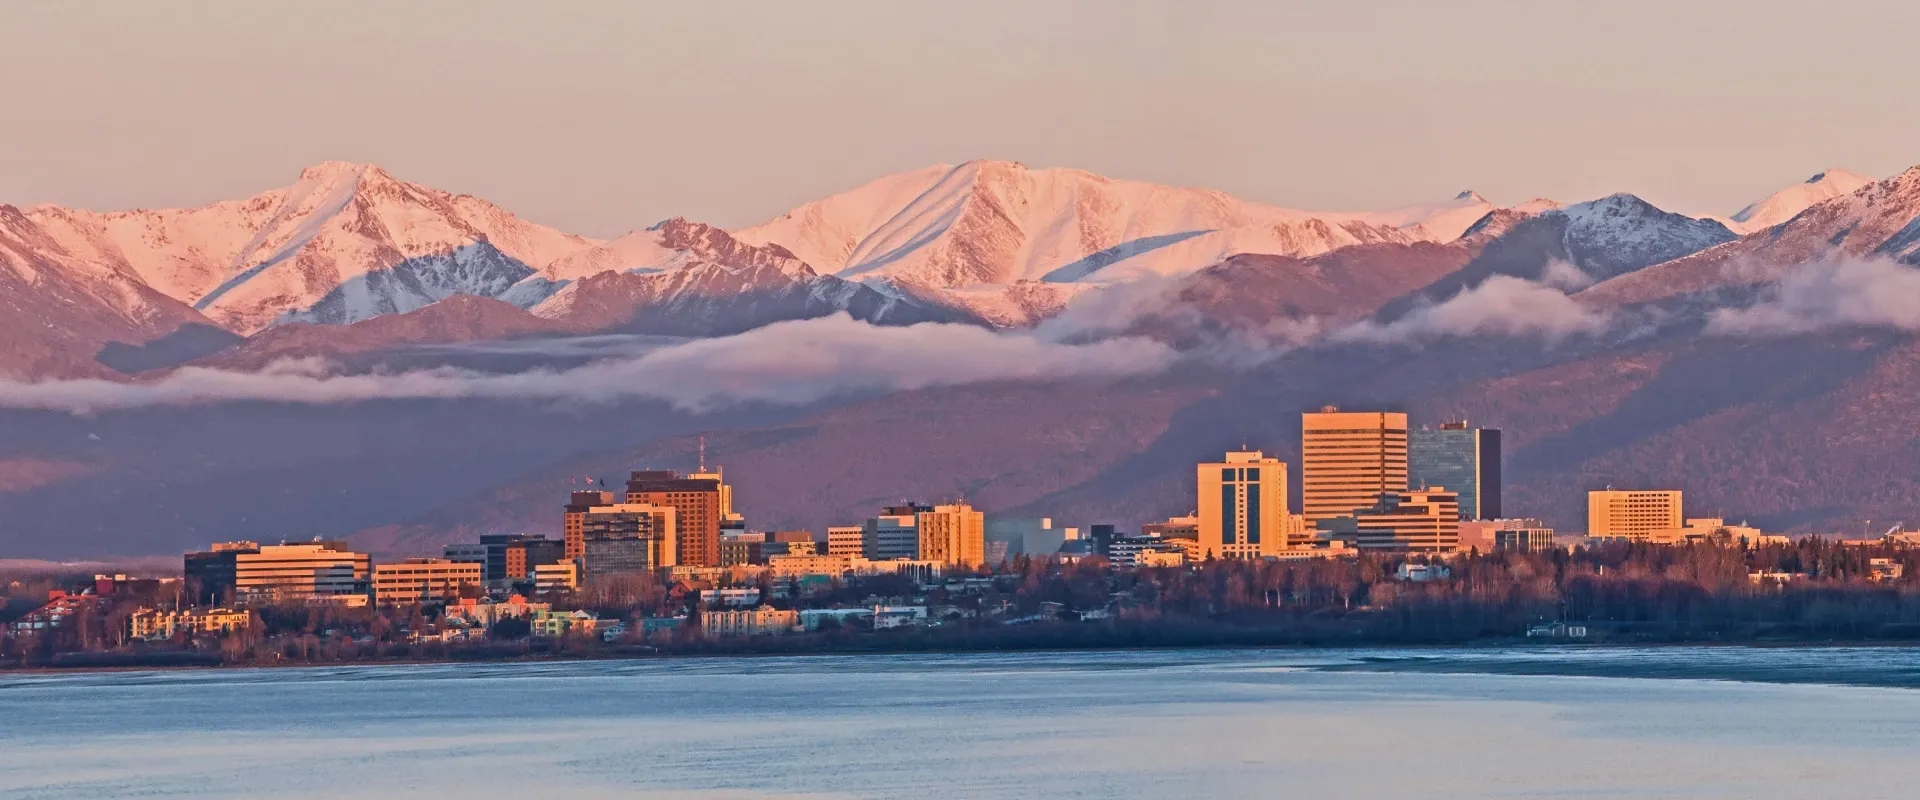 Anchorage skyline with mountains in the background